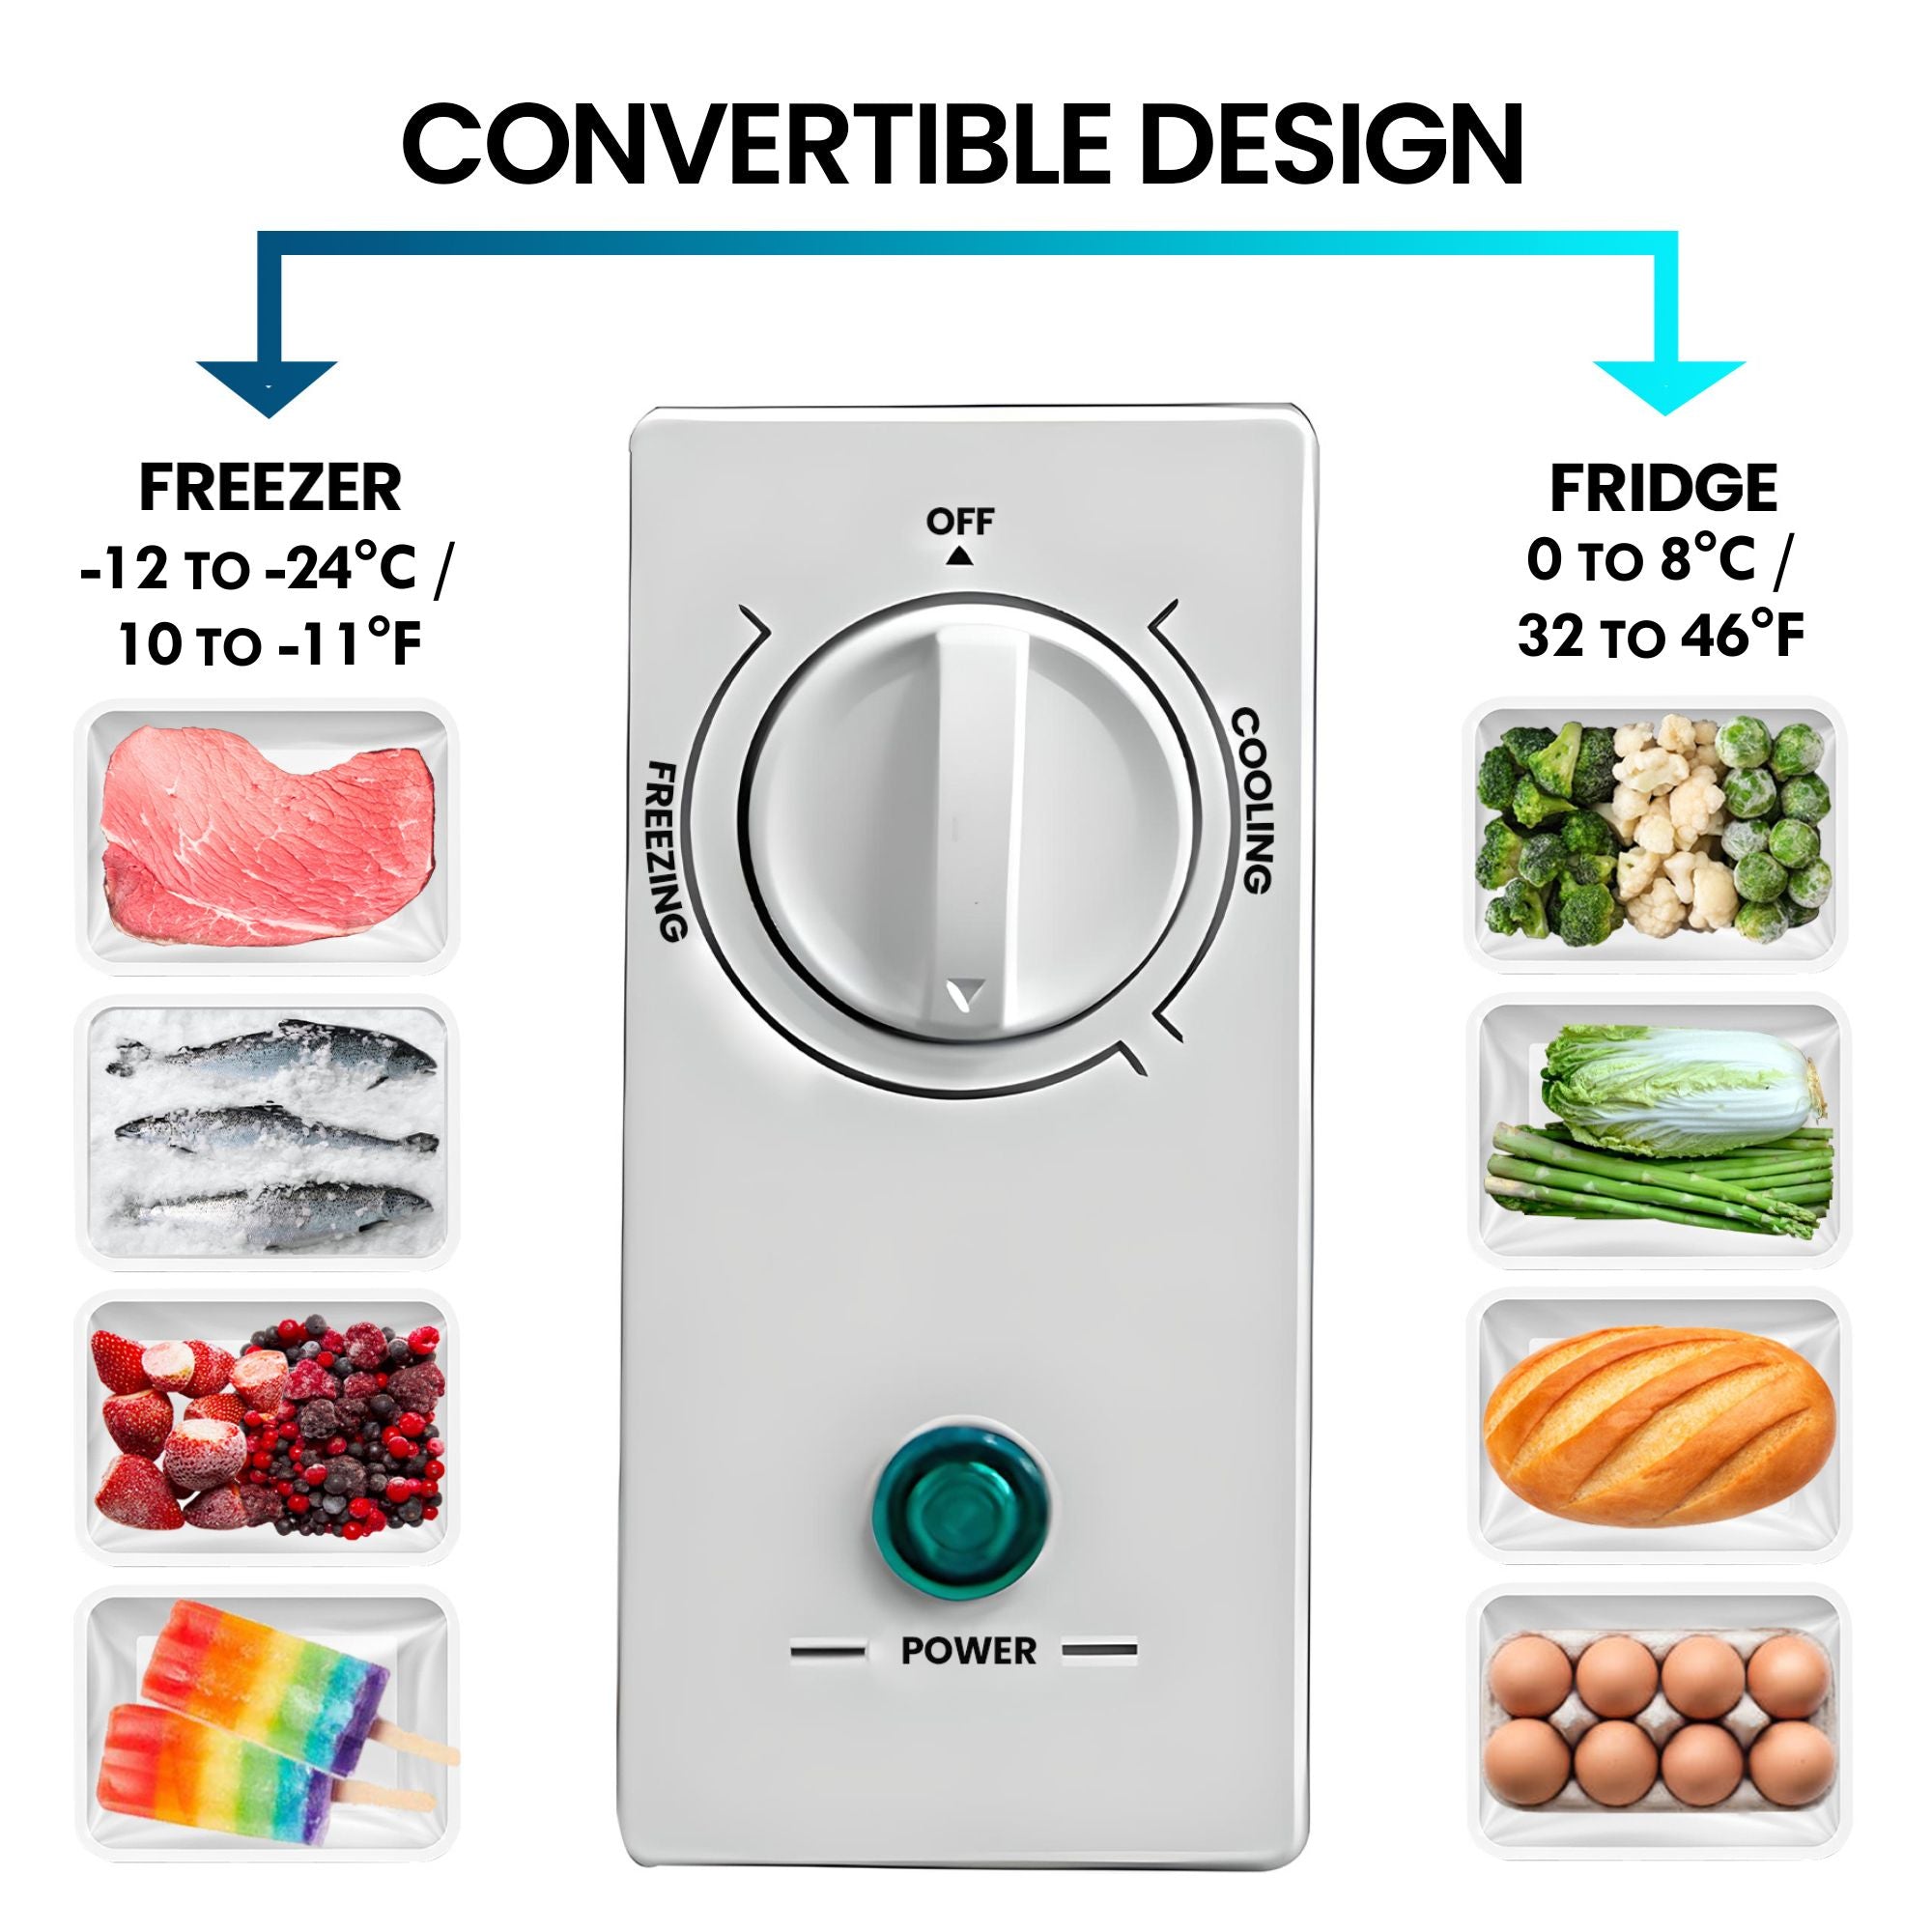 Closeup image of the temperature control dial with pictures of frozen foods to the left and refrigerator foods to the right. Text above reads, "Convertible design: Freezer -12°C to -24°C / 10 to -11°F; Fridge 1°C to 8°C / 32 to 46°F"